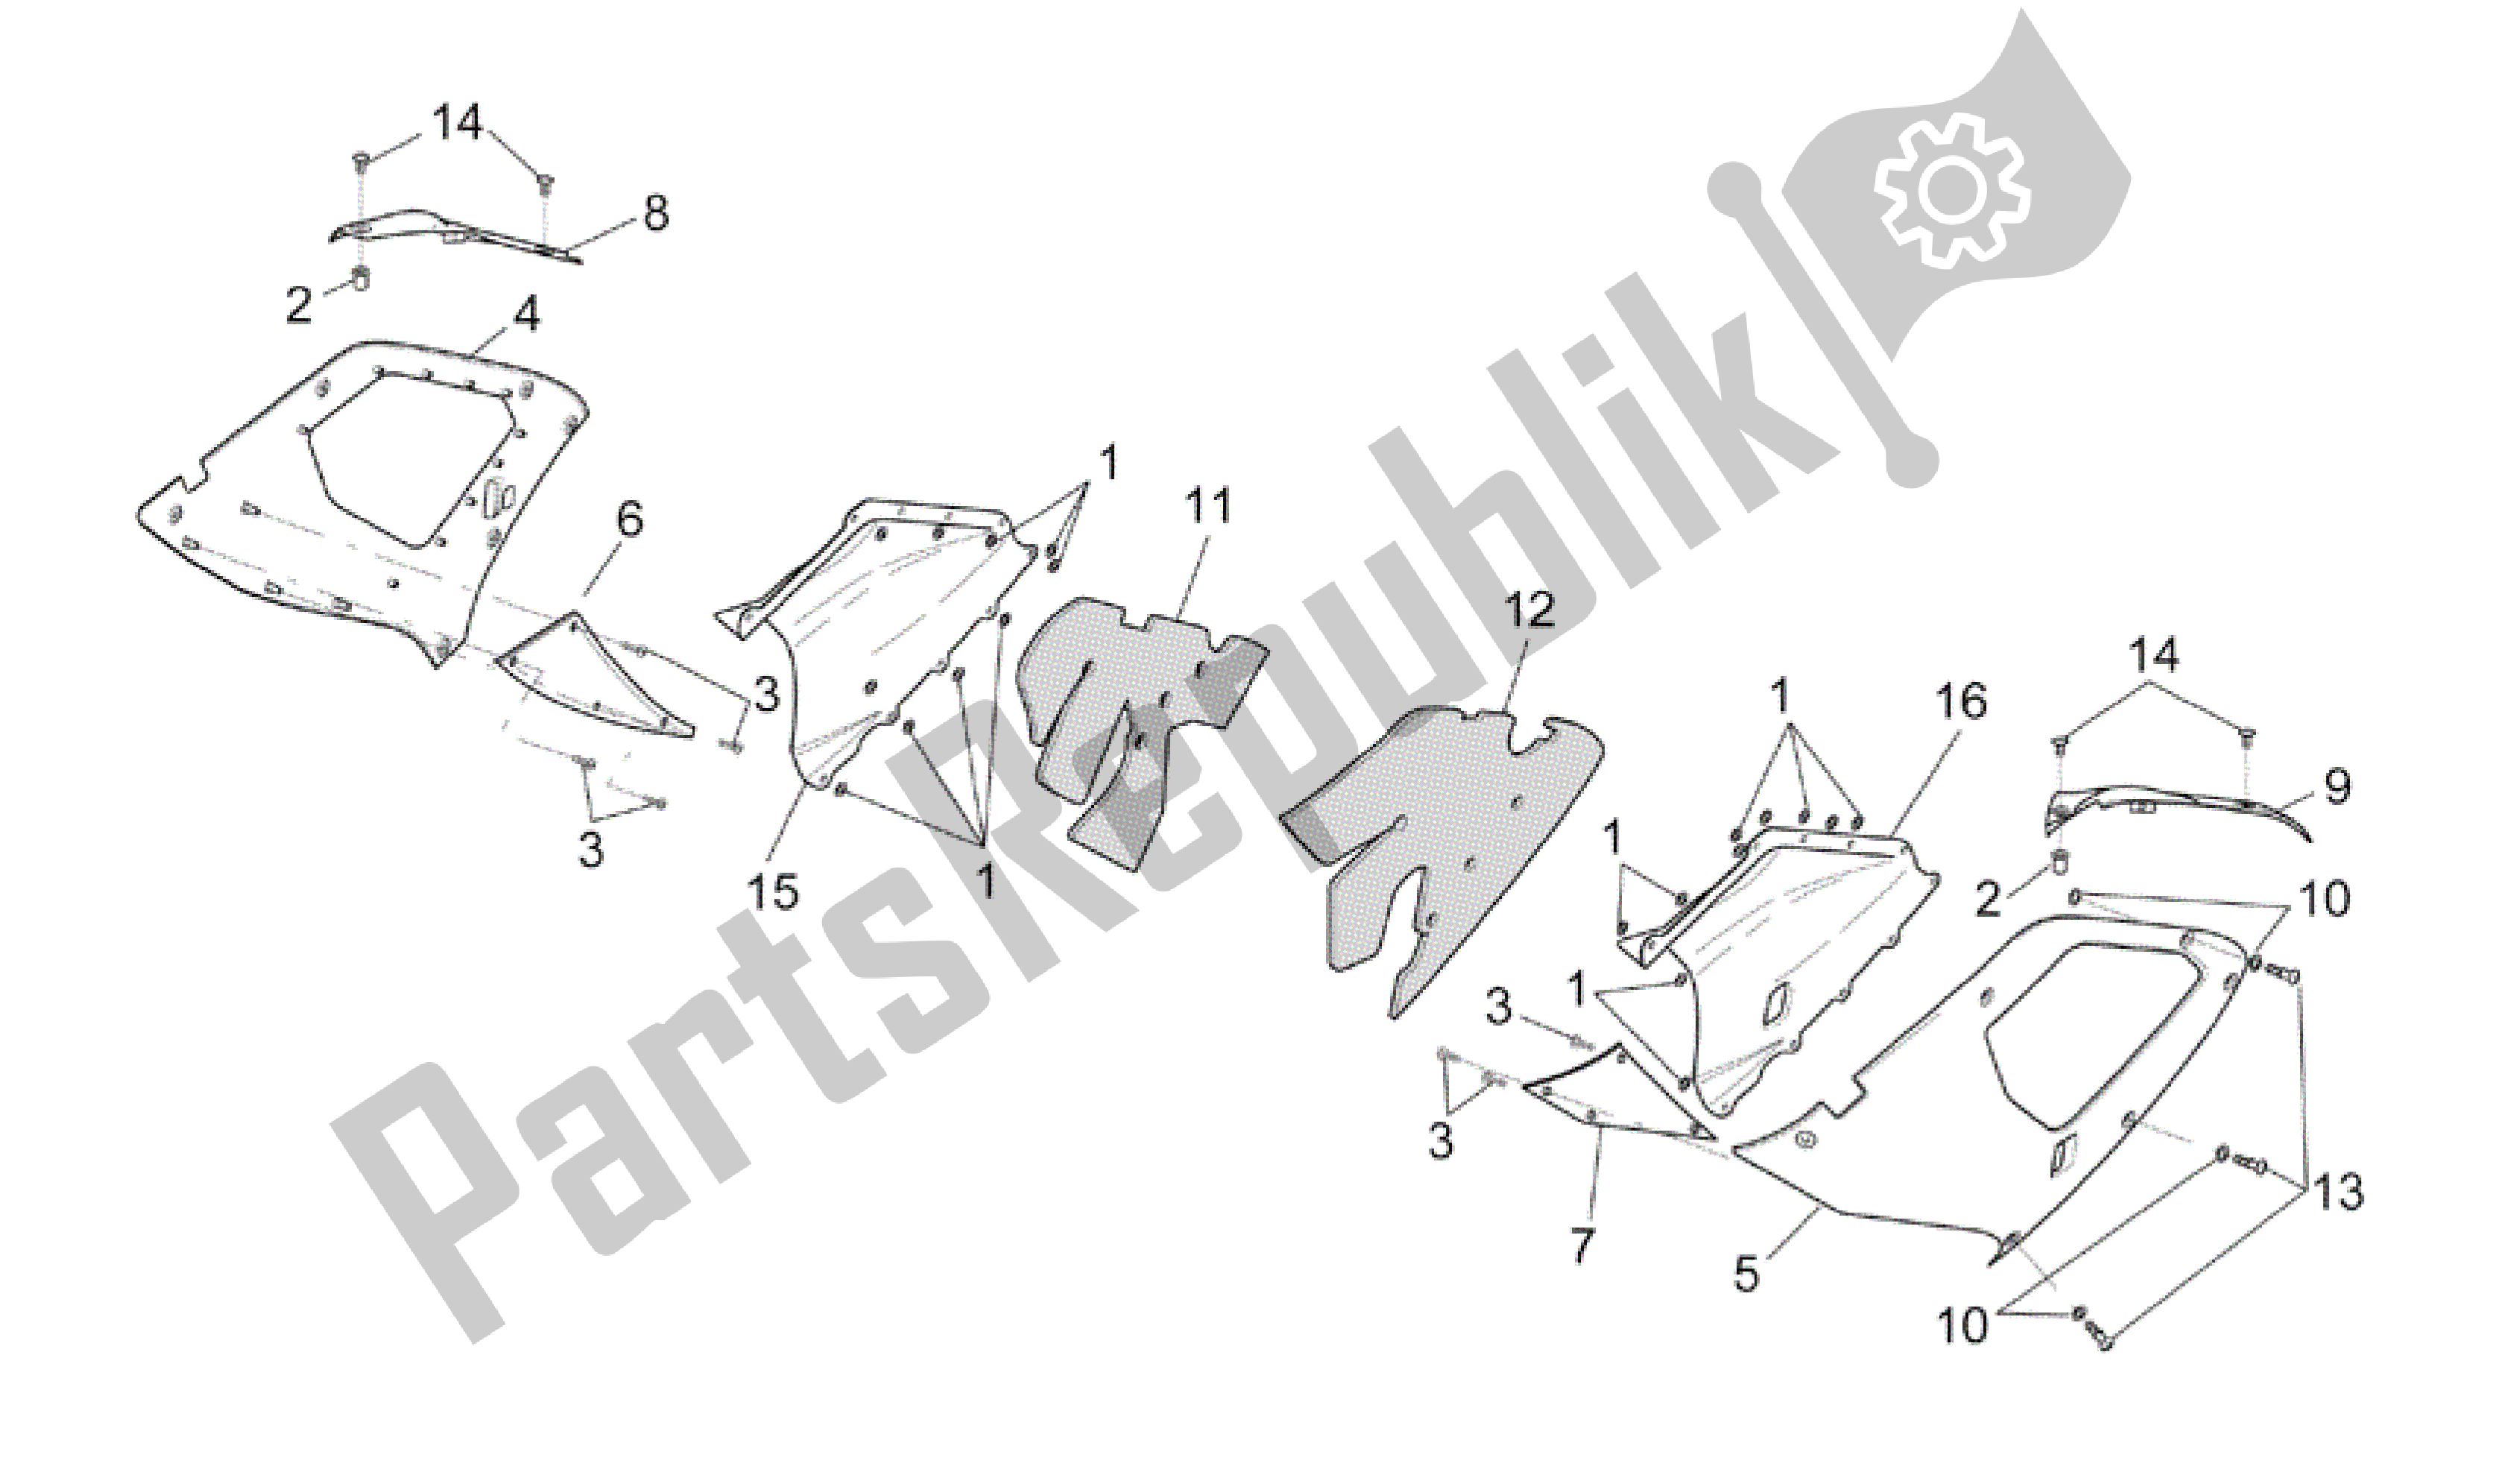 All parts for the Central Body - Upper Fairings of the Aprilia RSV Mille 3963 1000 2003